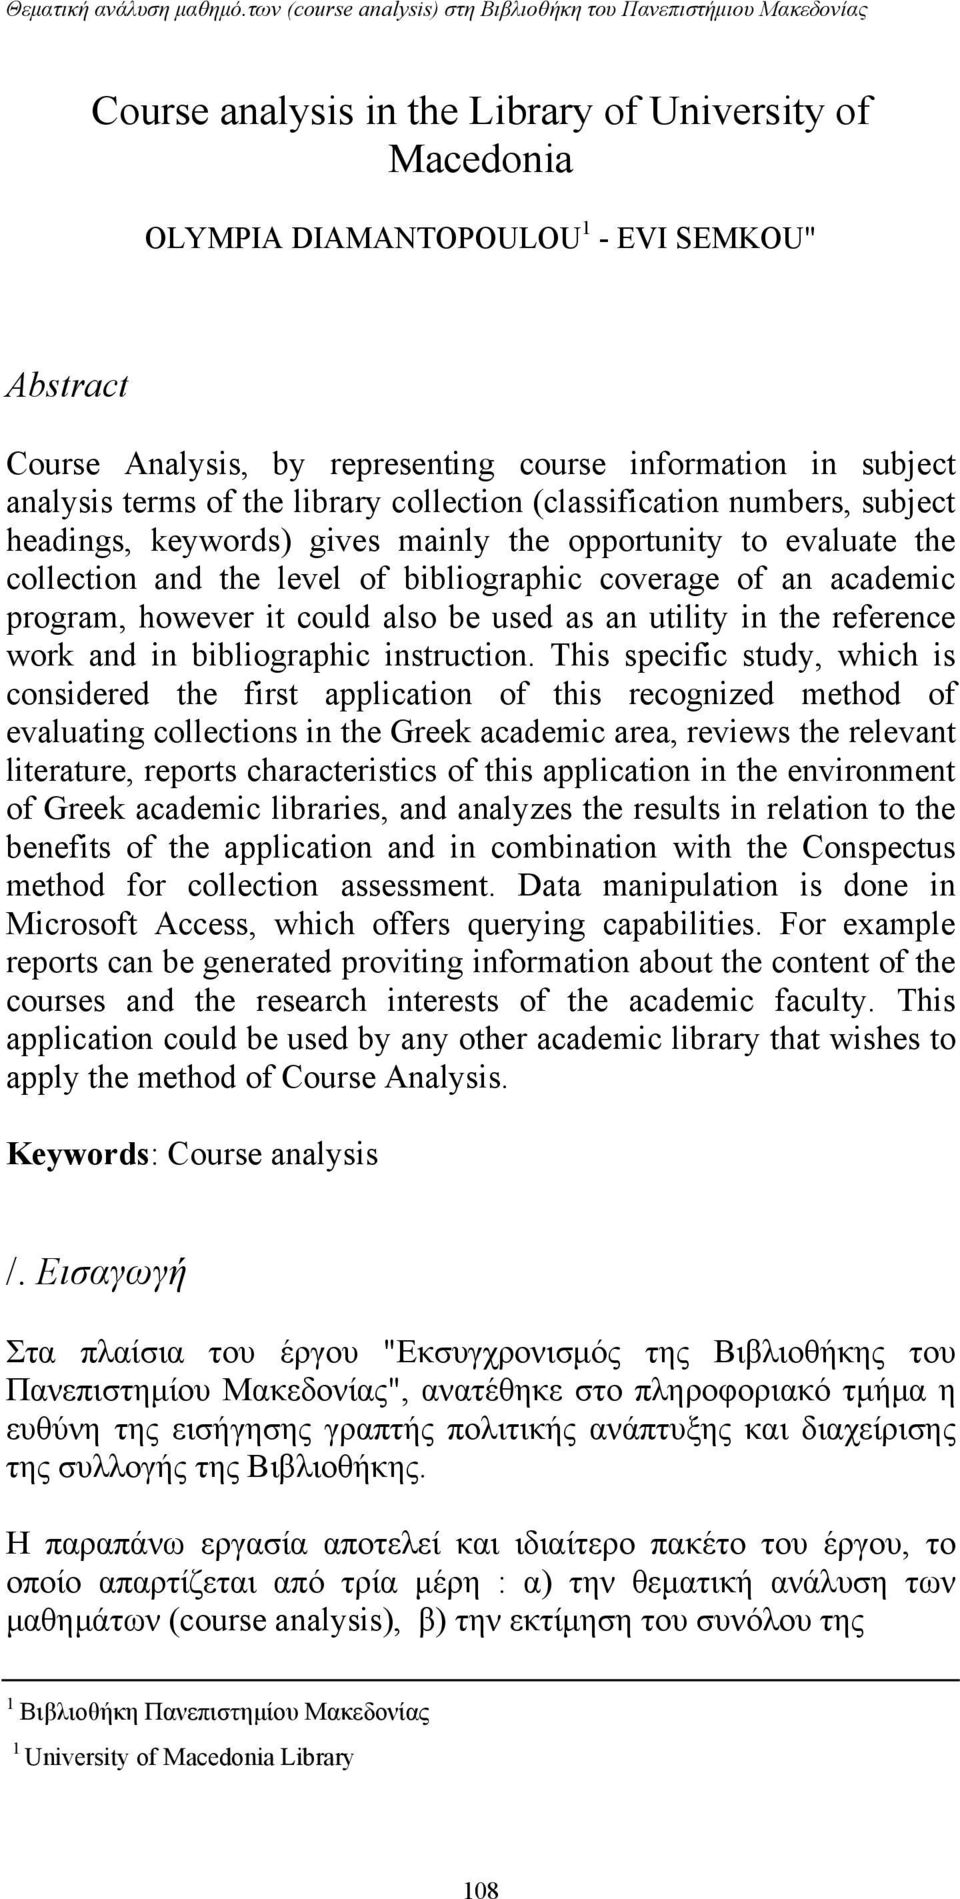 representing course information in subject analysis terms of the library collection (classification numbers, subject headings, keywords) gives mainly the opportunity to evaluate the collection and